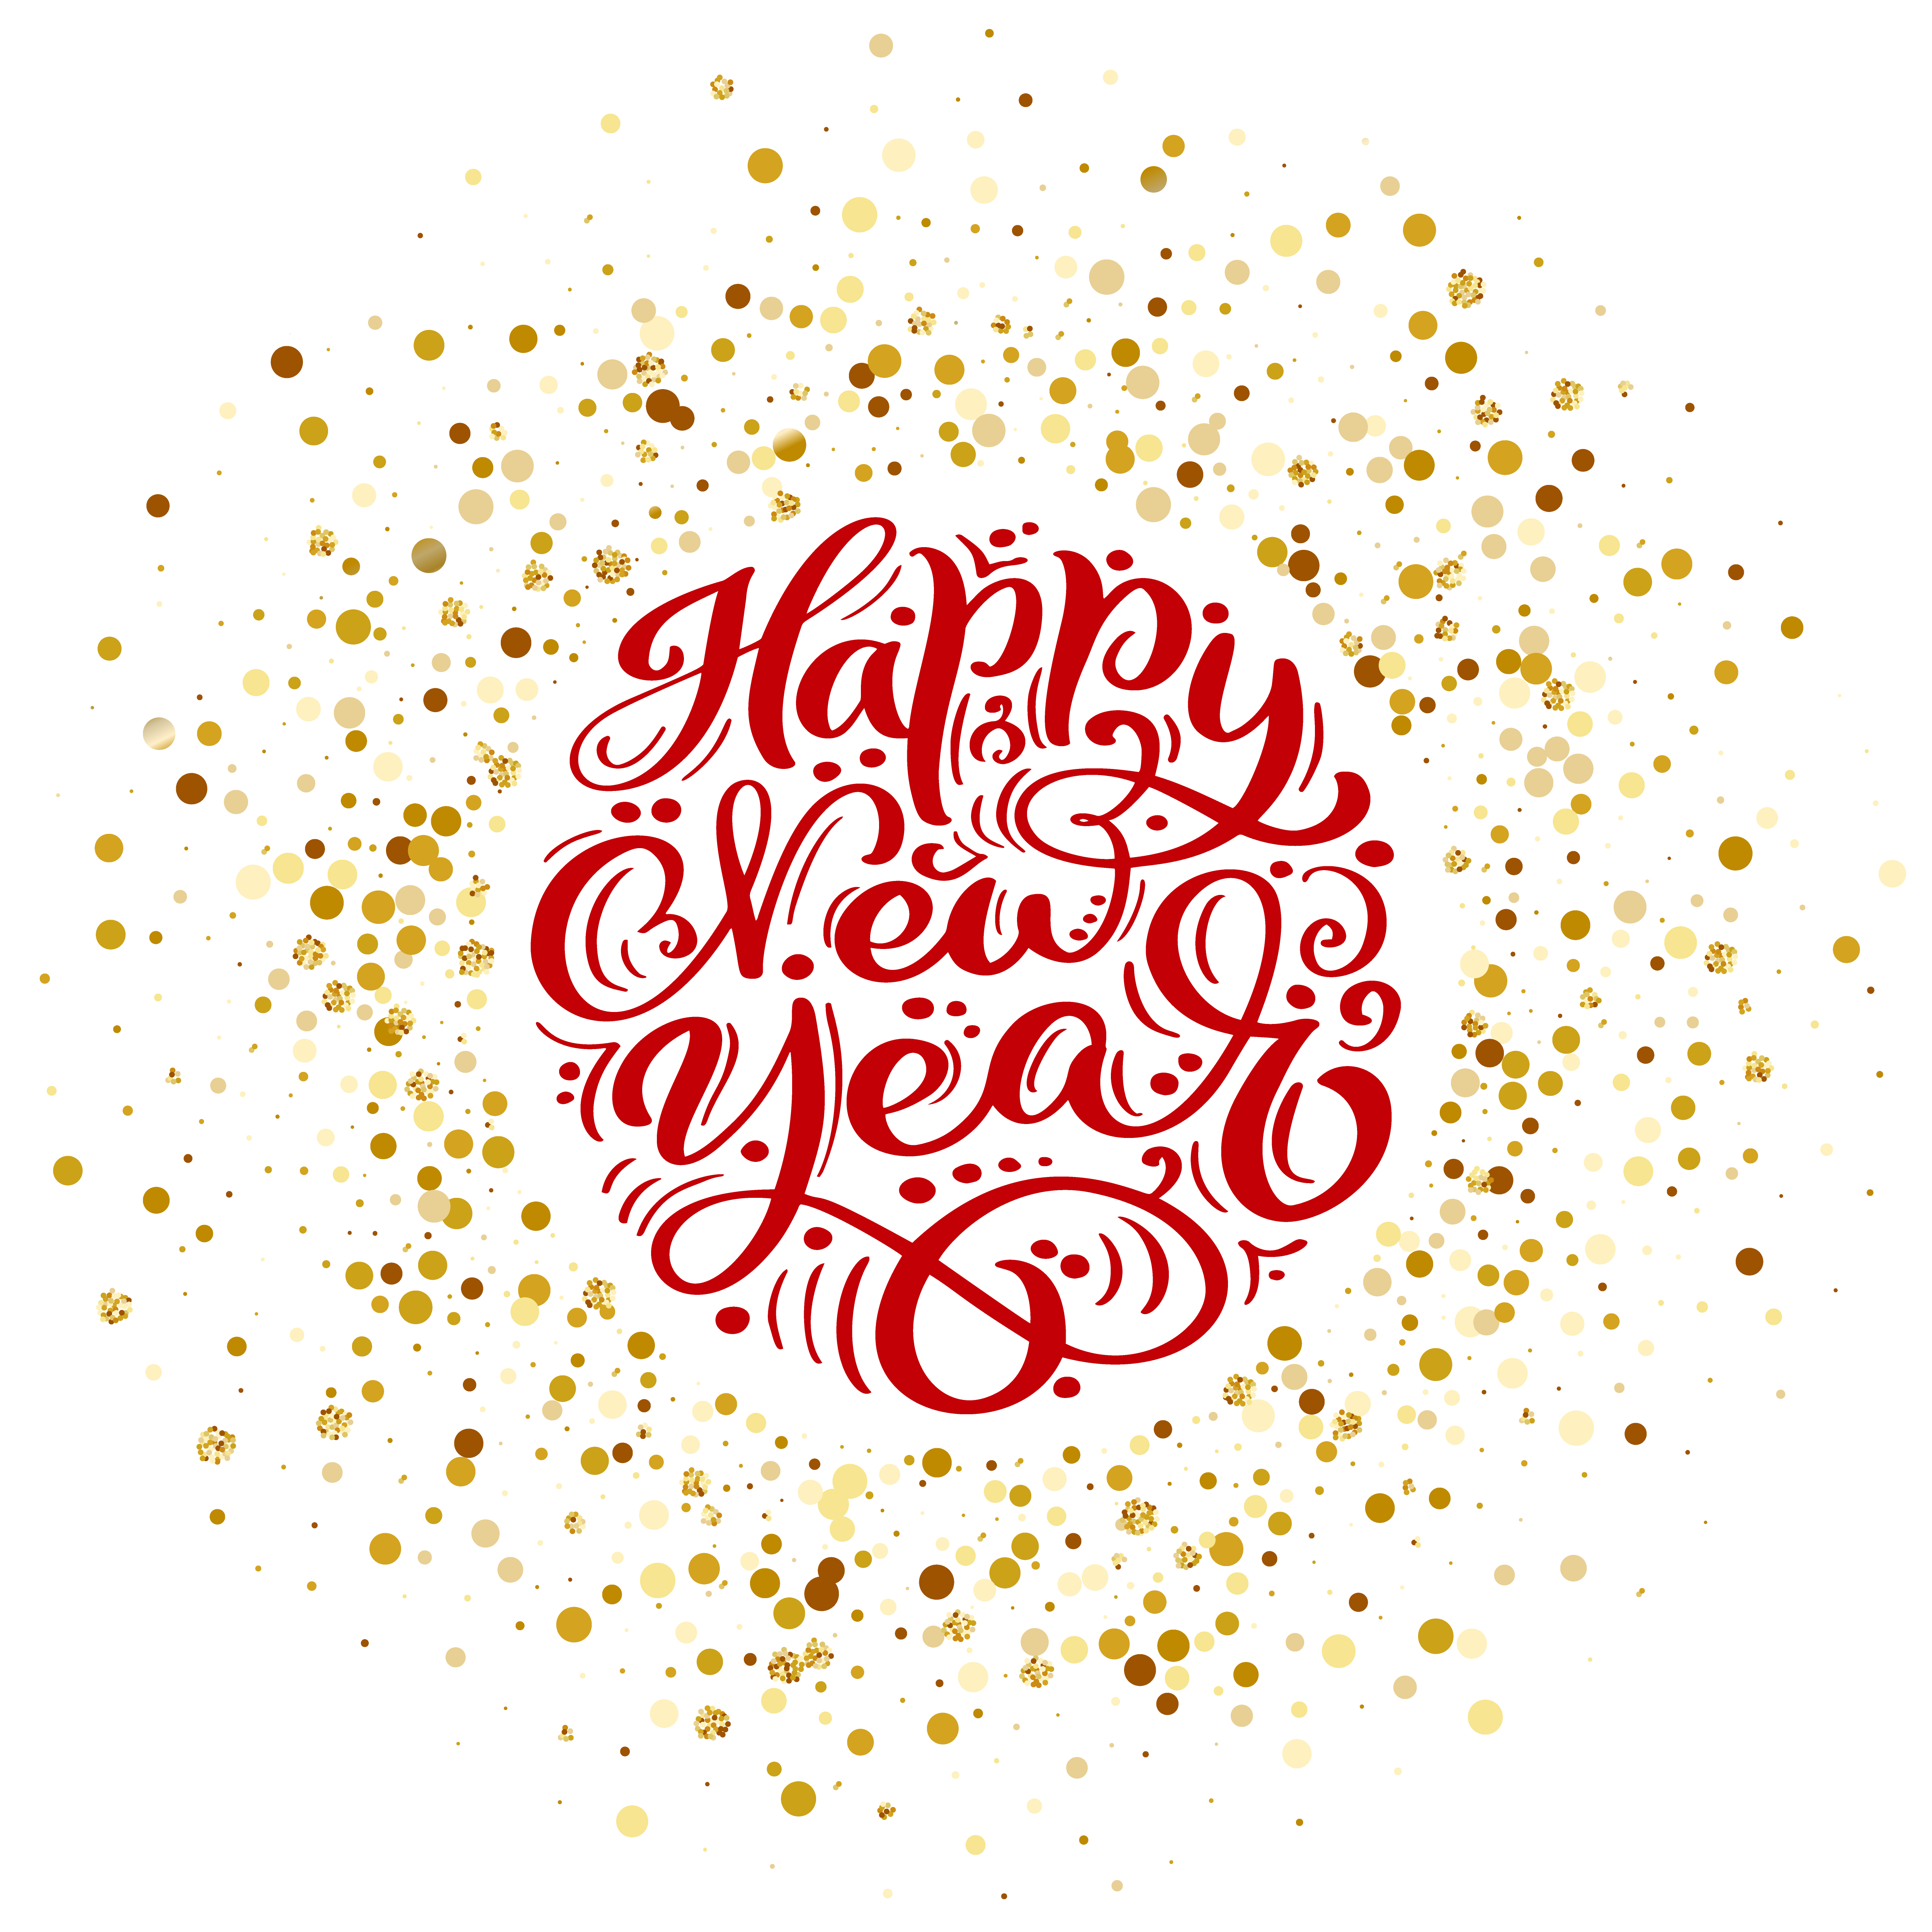  Happy  New  Year  vector text Calligraphic Lettering design 